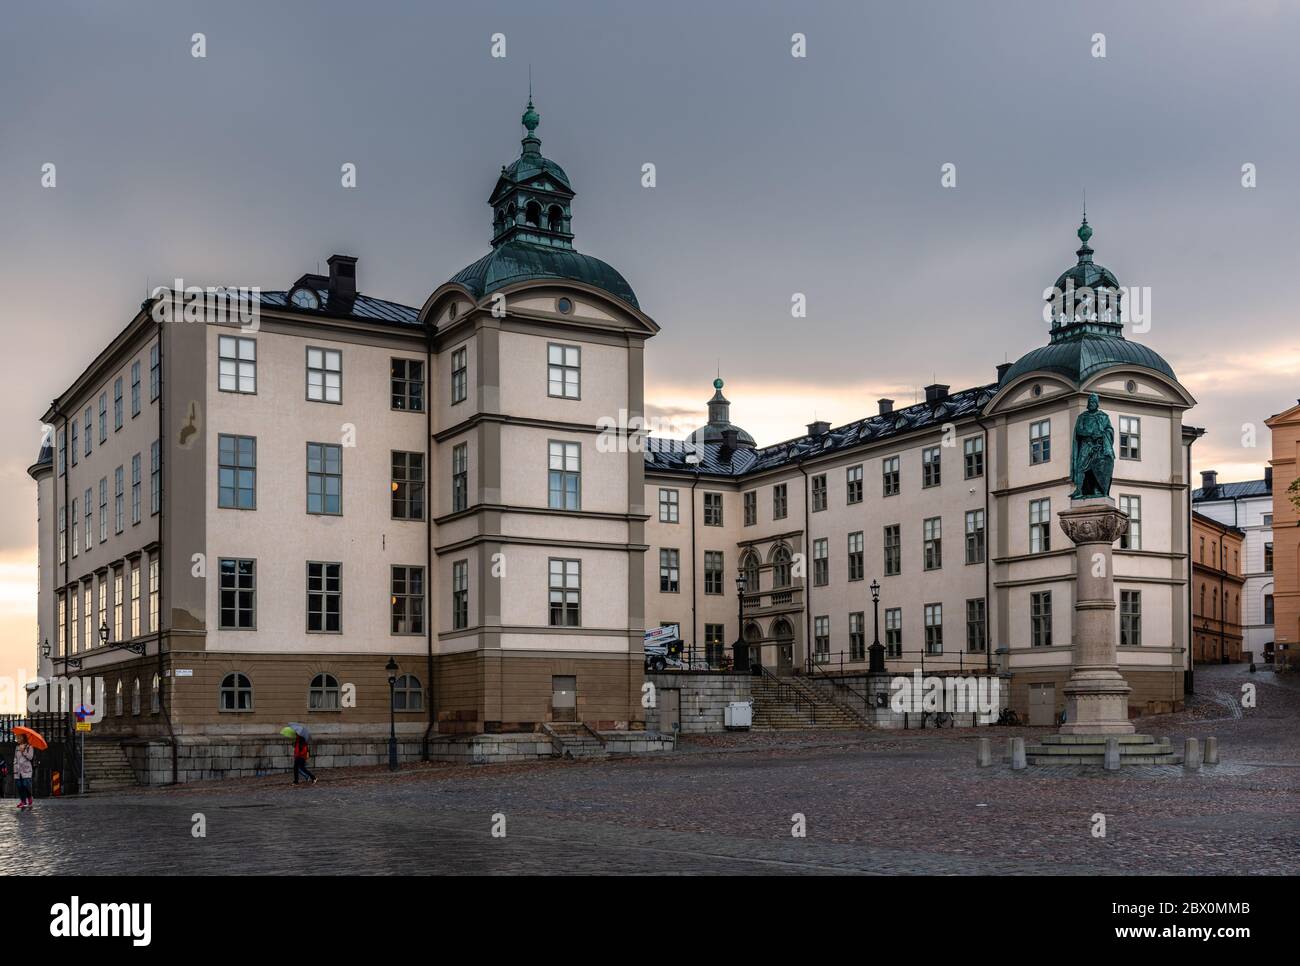 Page 2 - Svea High Resolution Stock Photography and Images - Alamy